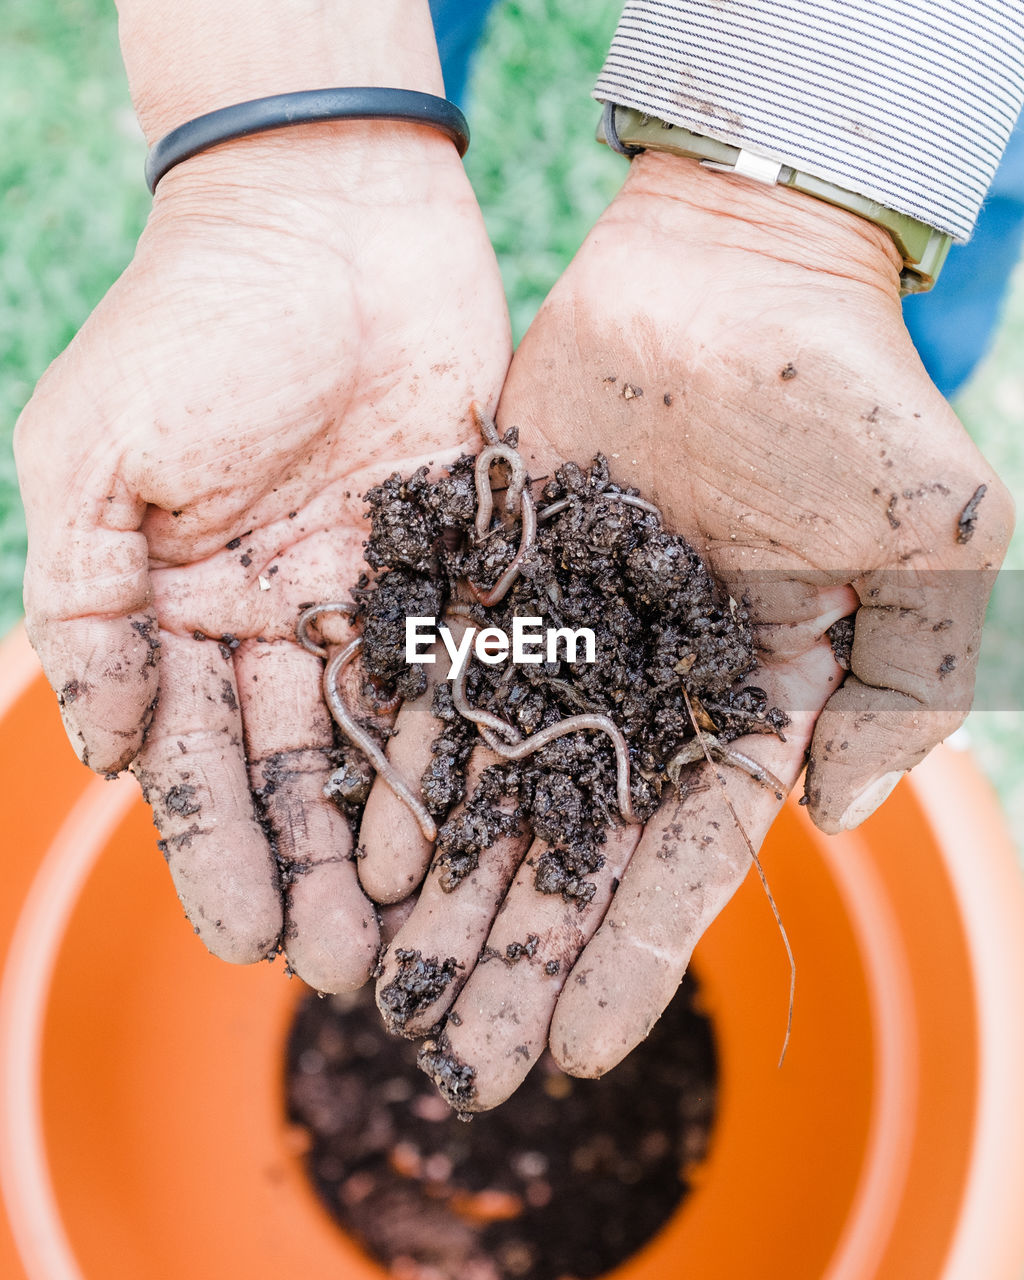 Man holding earthworms and vermicompost